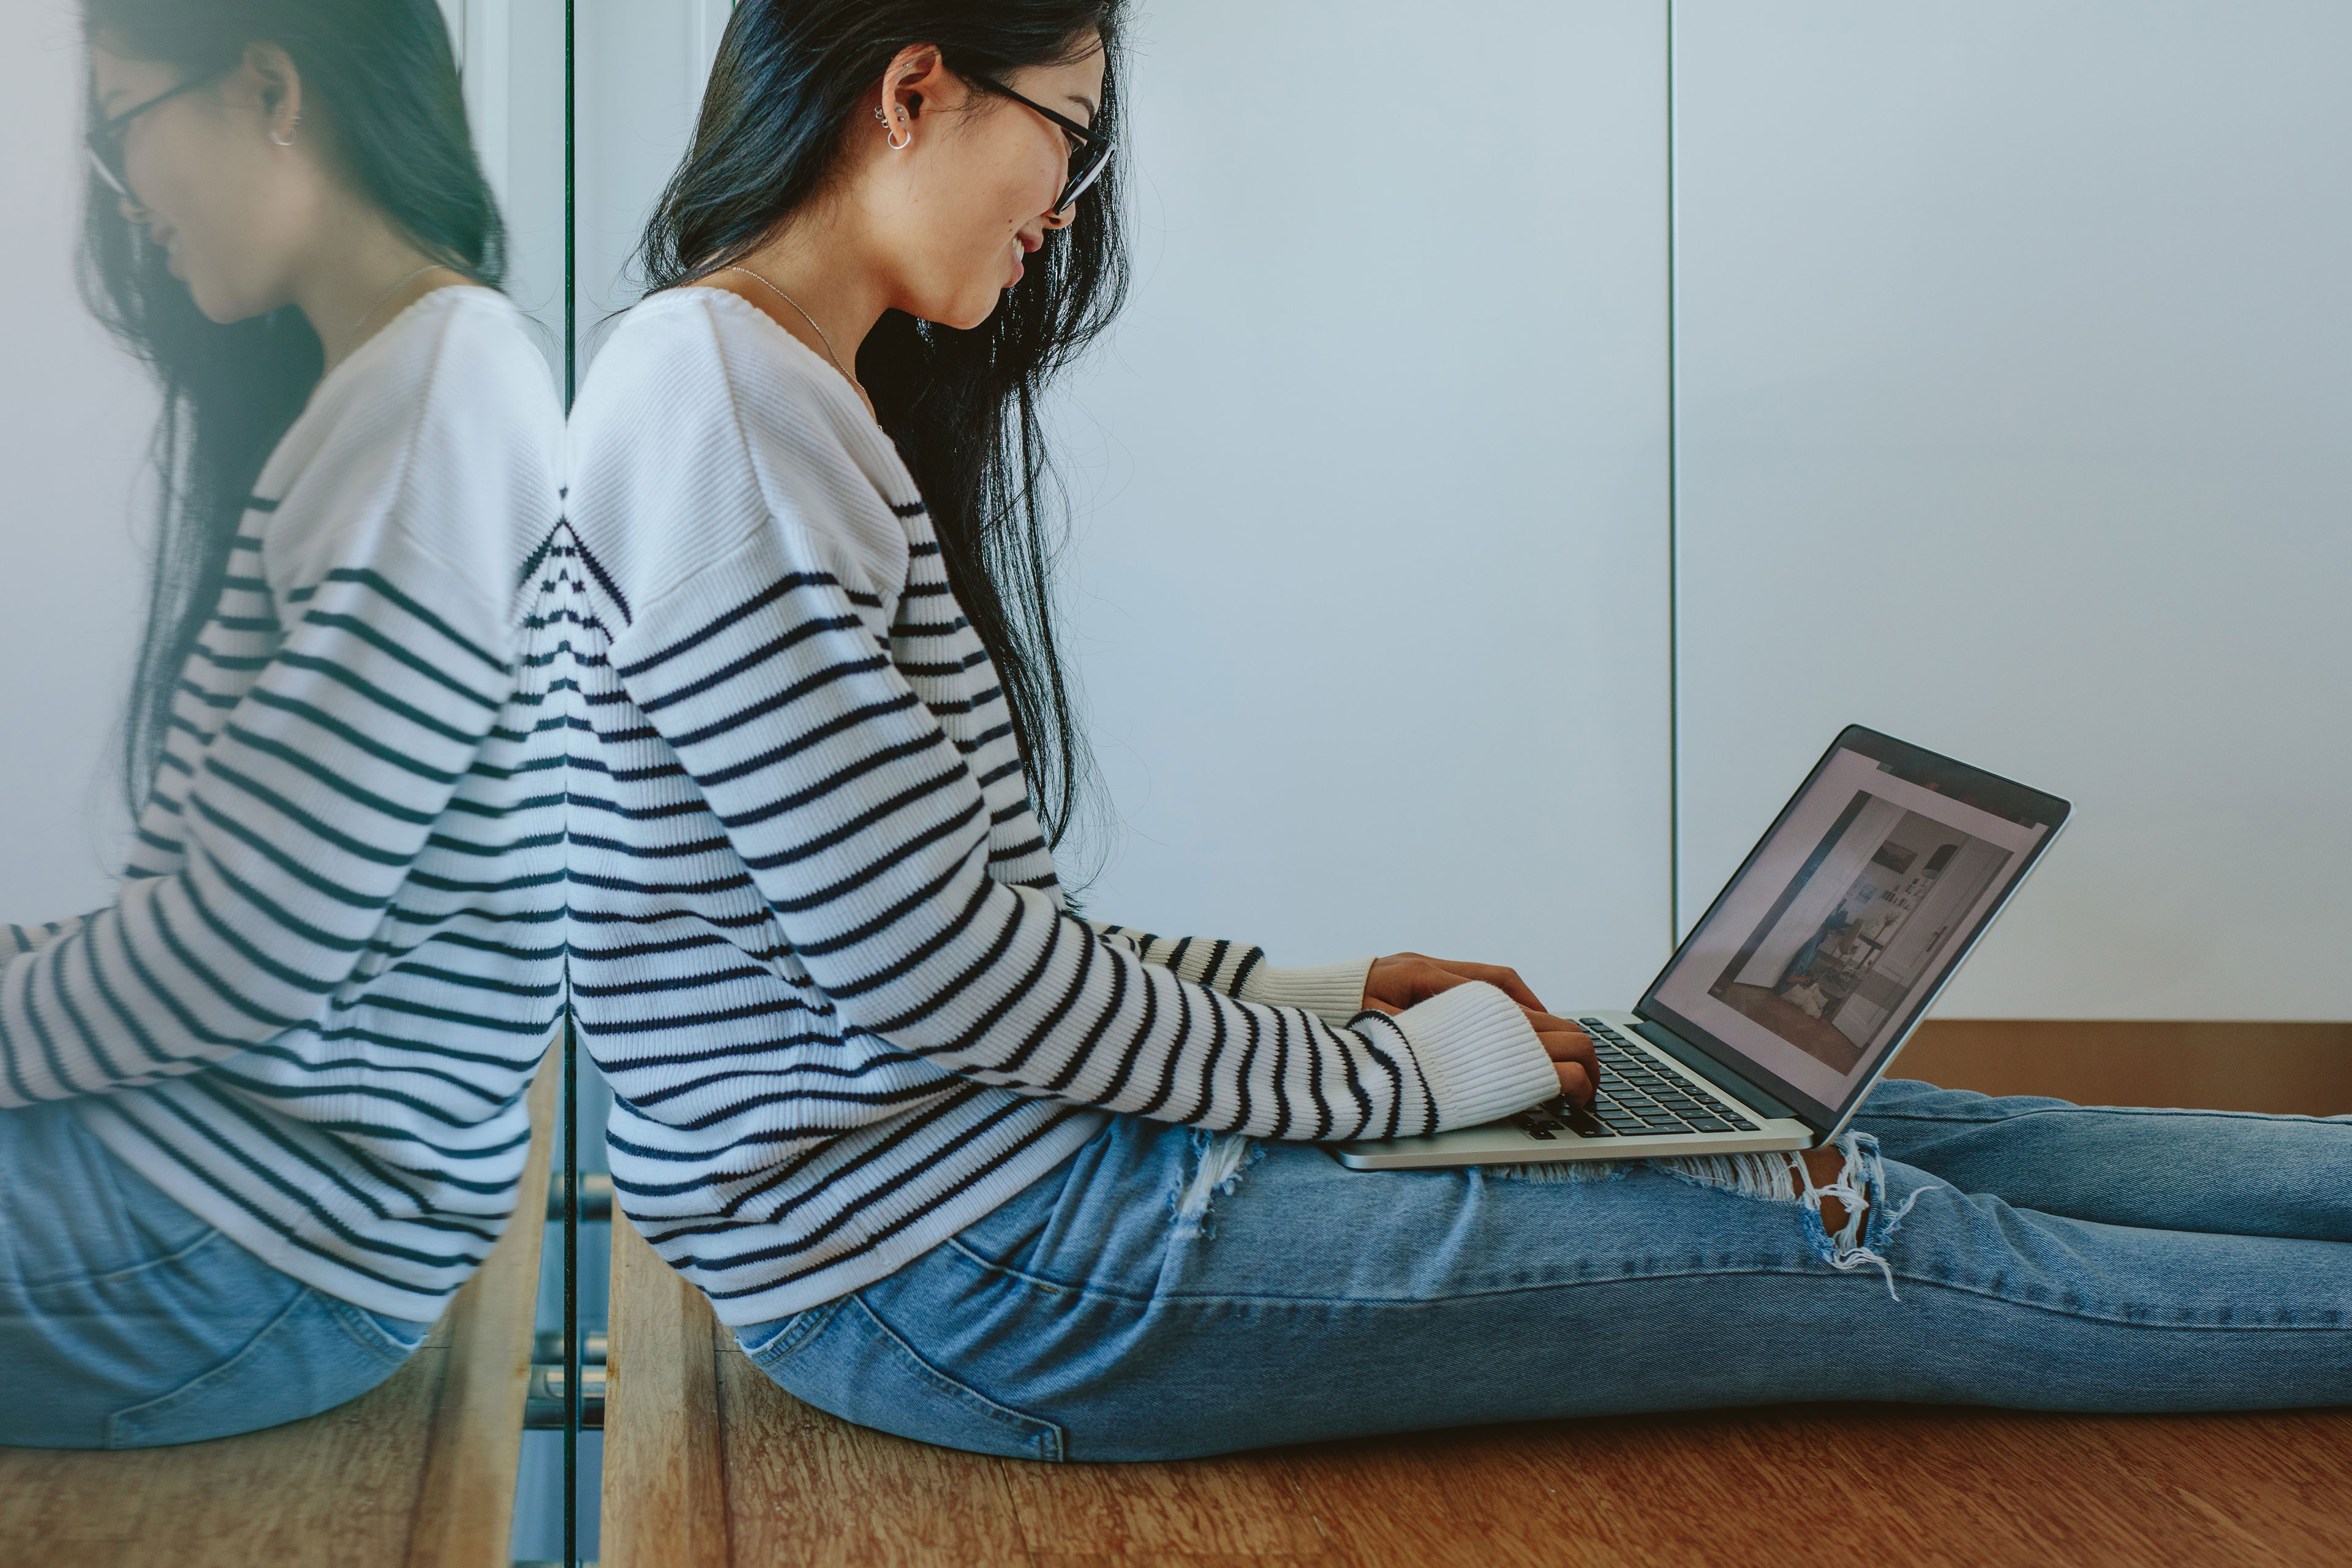 Young woman in stripes sits with laptop on floor